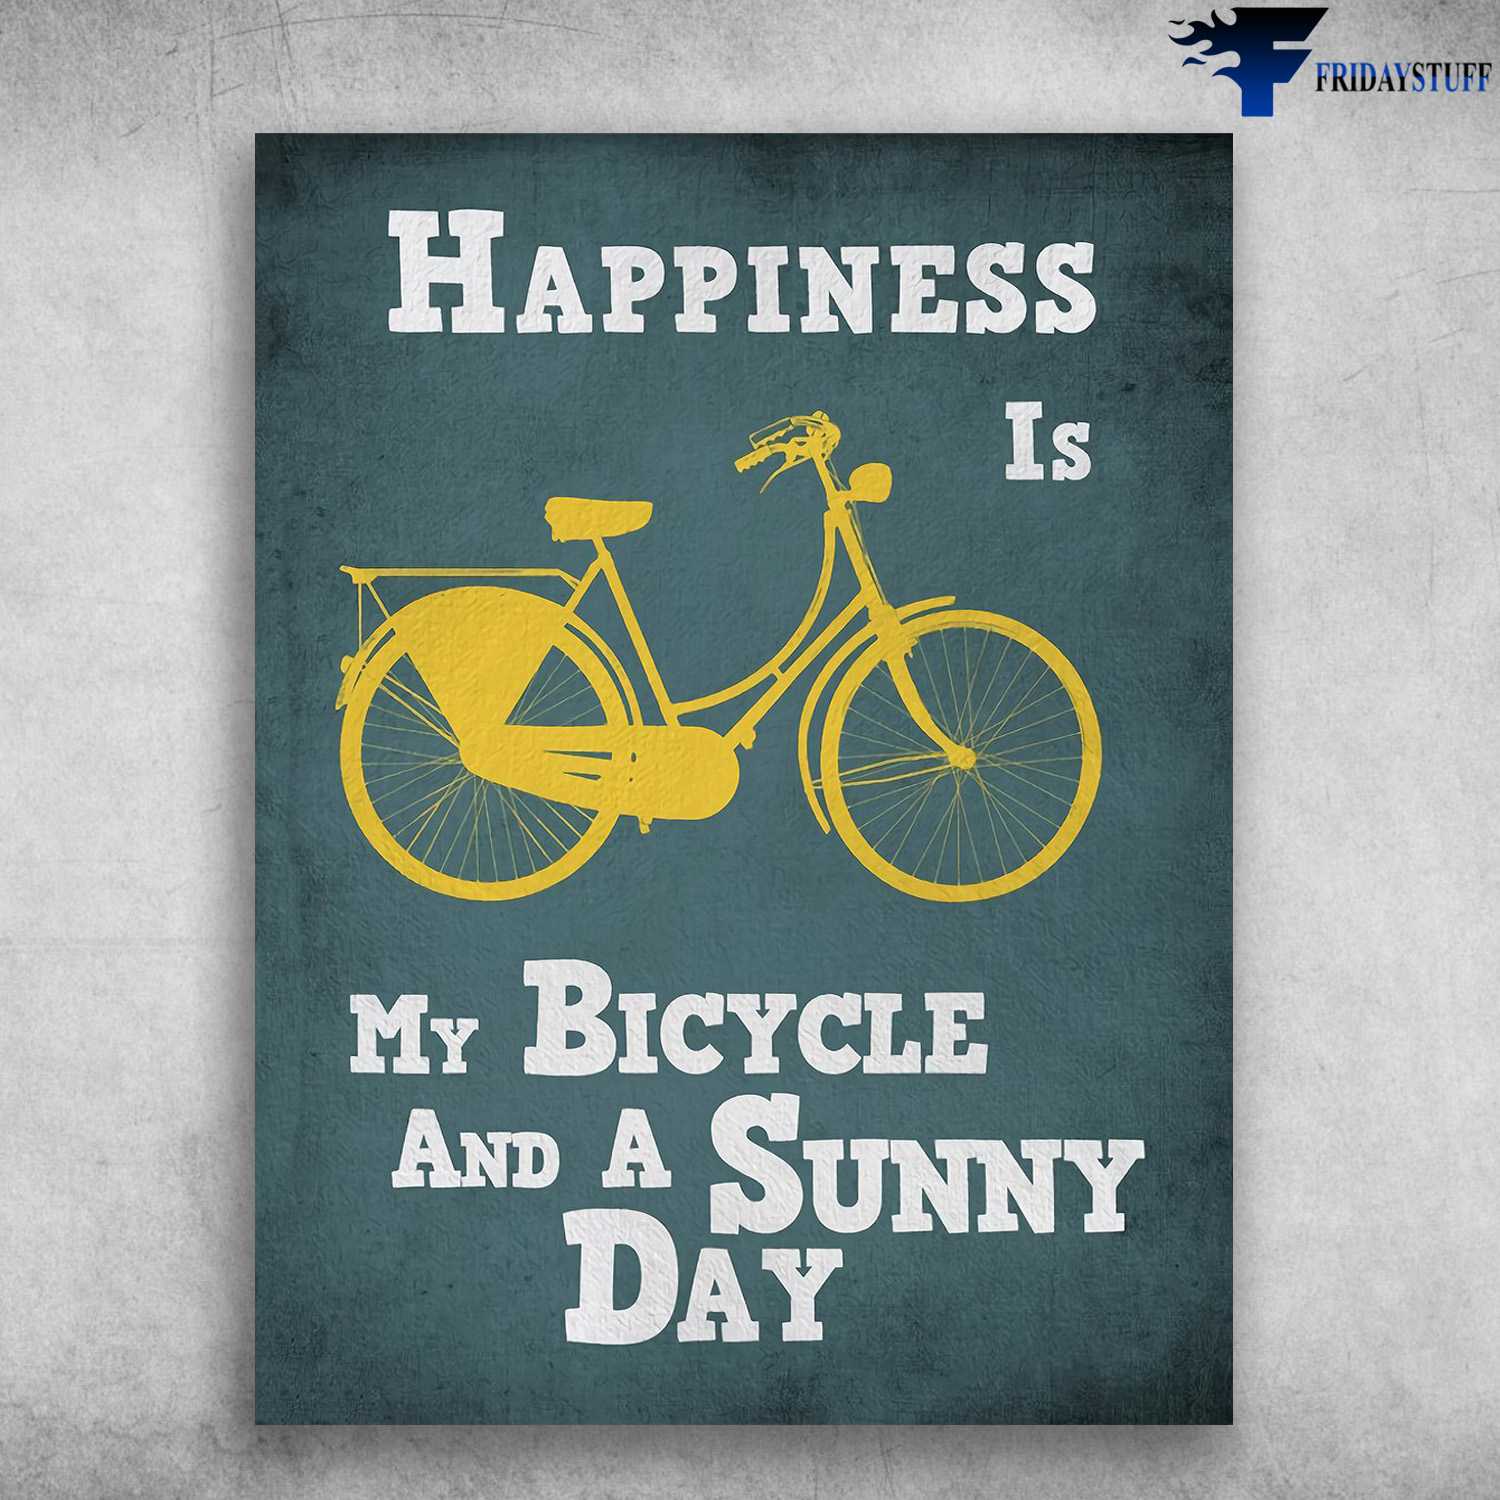 Bicycle Poster - Happiness Is My Bicycle, And A Sunny Day